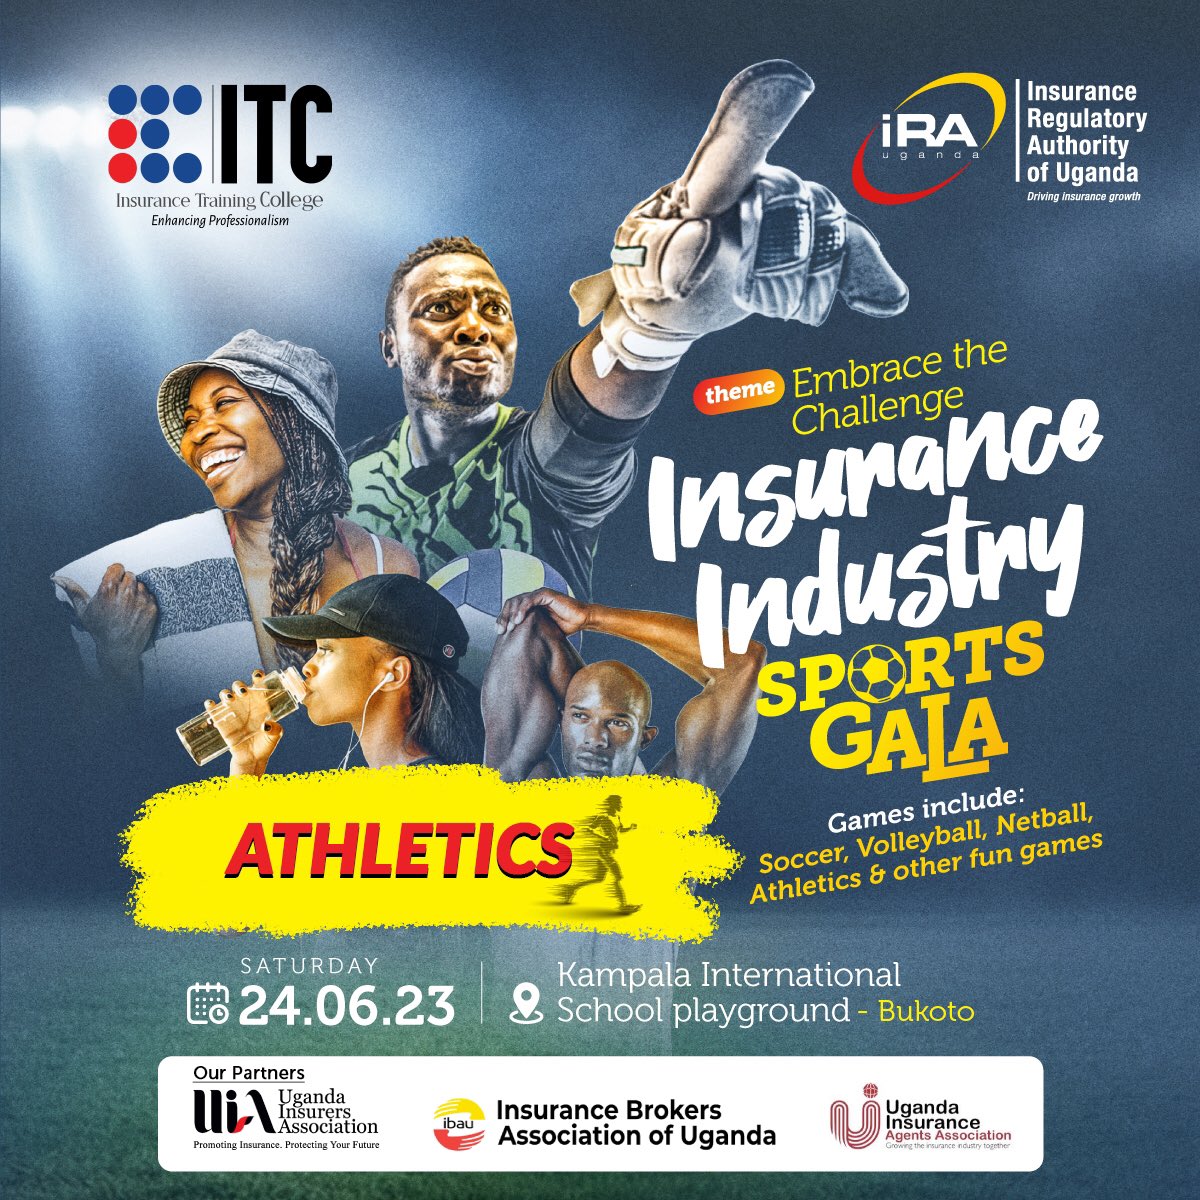 Are you Athletic & in the Insurance Industry? 
Your time to shine is on!
Embrace the Challenge at this years Insurance Industry Sports Gala courtesy of @ITC_Kampala, @IraUganda, @The_UIA, IBAU & Uganda Insurance Agents Association. 

#InsuranceIndustrySportsGala23